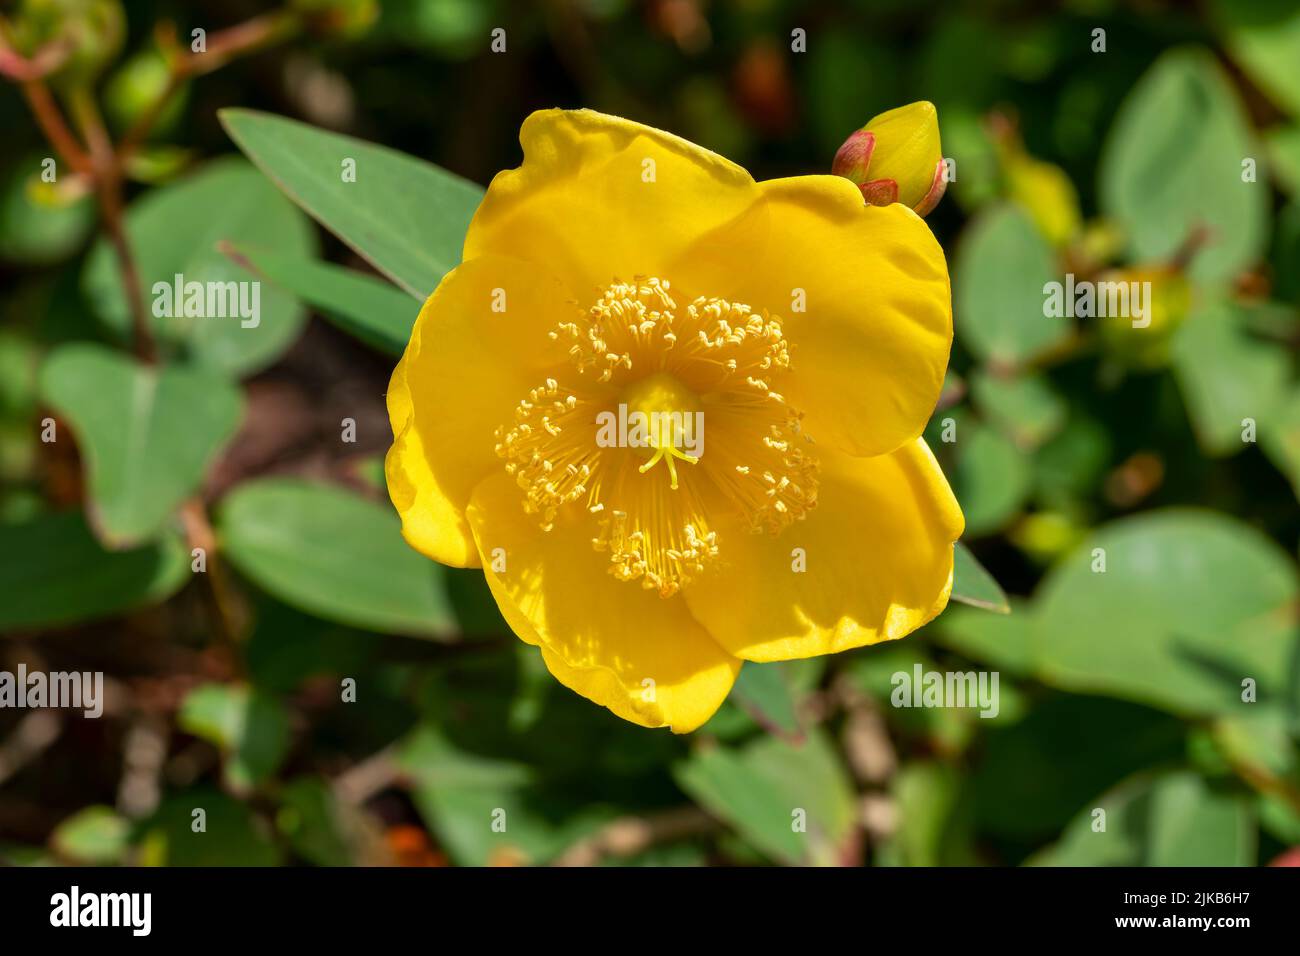 Hypericum forrestii a summer autumn fall flowering evergreen shrub plant with a yellow summertime flower commonly known as Forrest St John's wort, sto Stock Photo